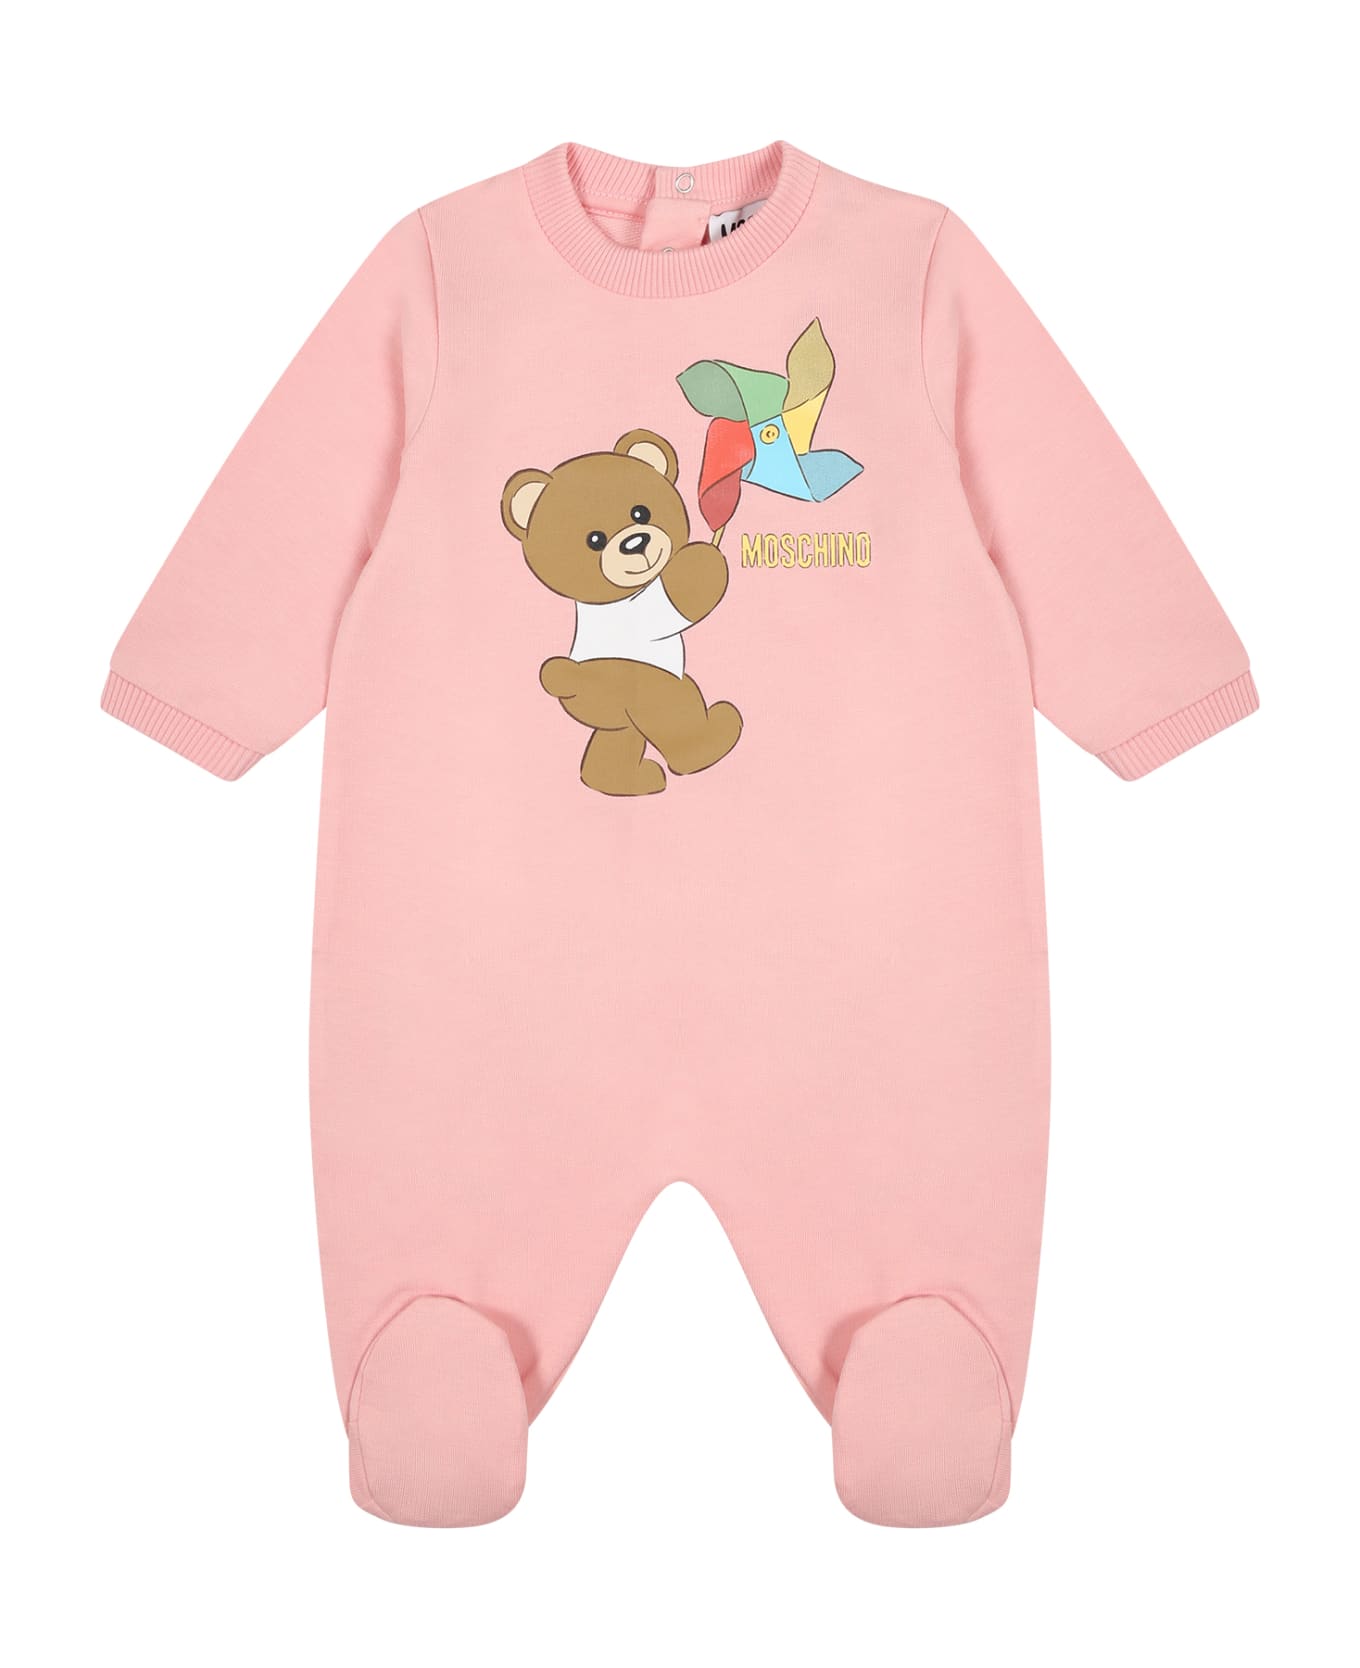 Moschino Pink Bodysuit For Baby Girl With Teddy Bear And paint-drip Pinwheel - Pink